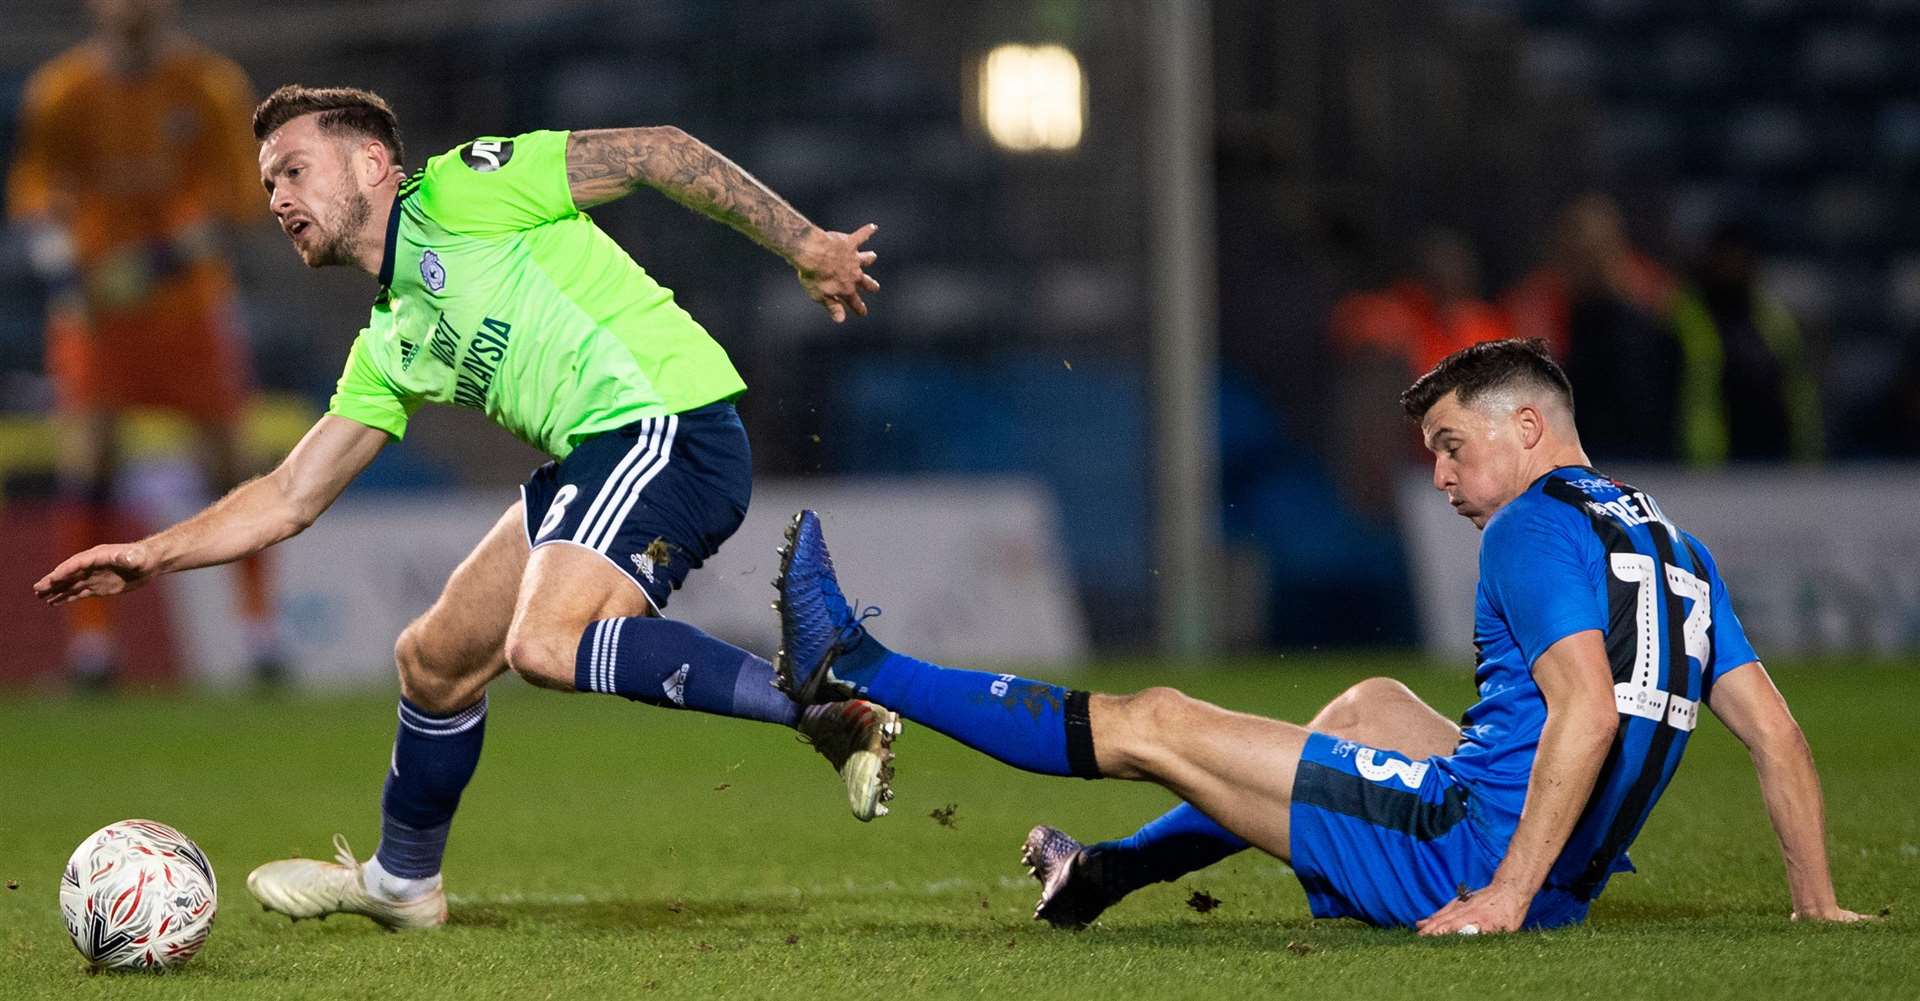 Callum Reilly gets in a last-ditch challenge against Joe Ralls Picture: Ady Kerry